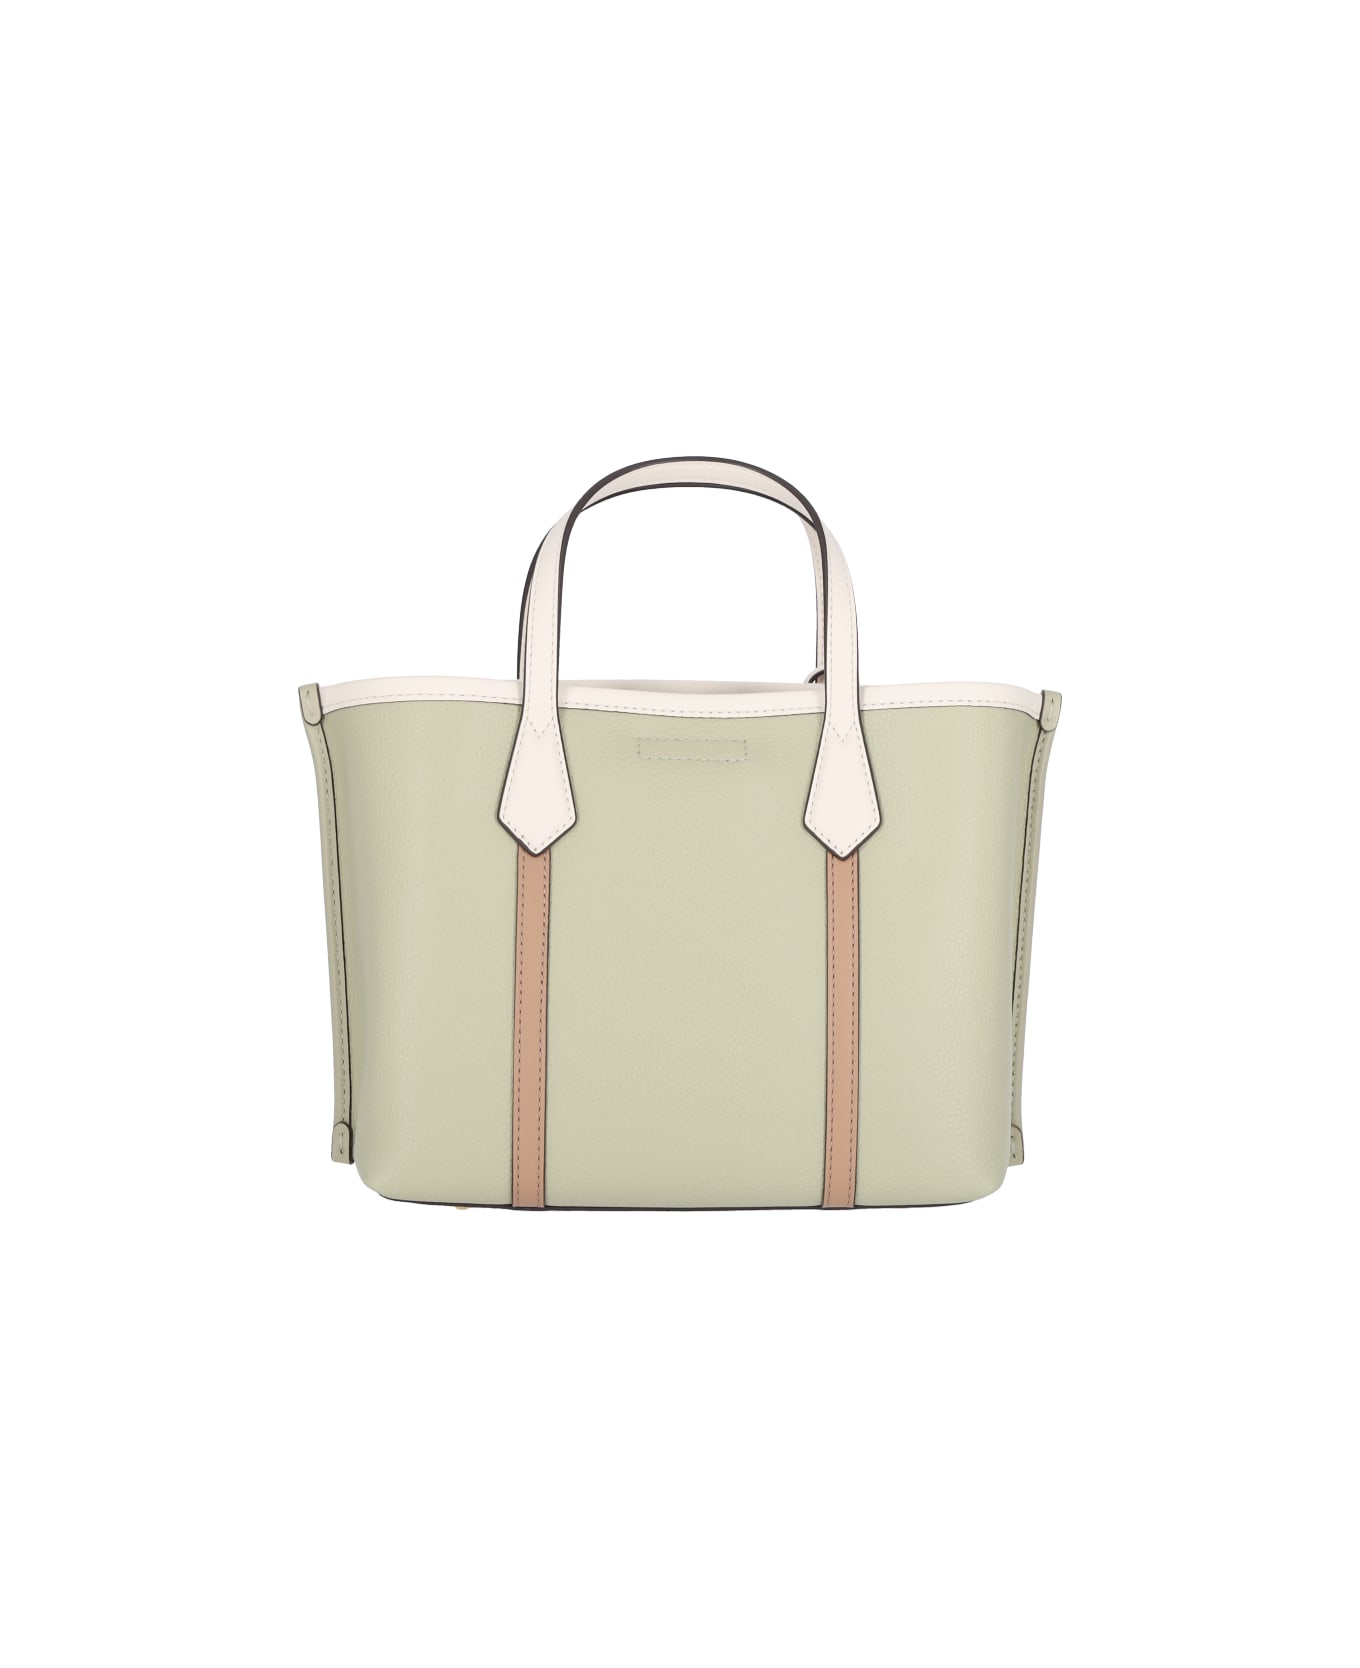 Tory Burch 'perry' Small Tote Bag - Green トートバッグ